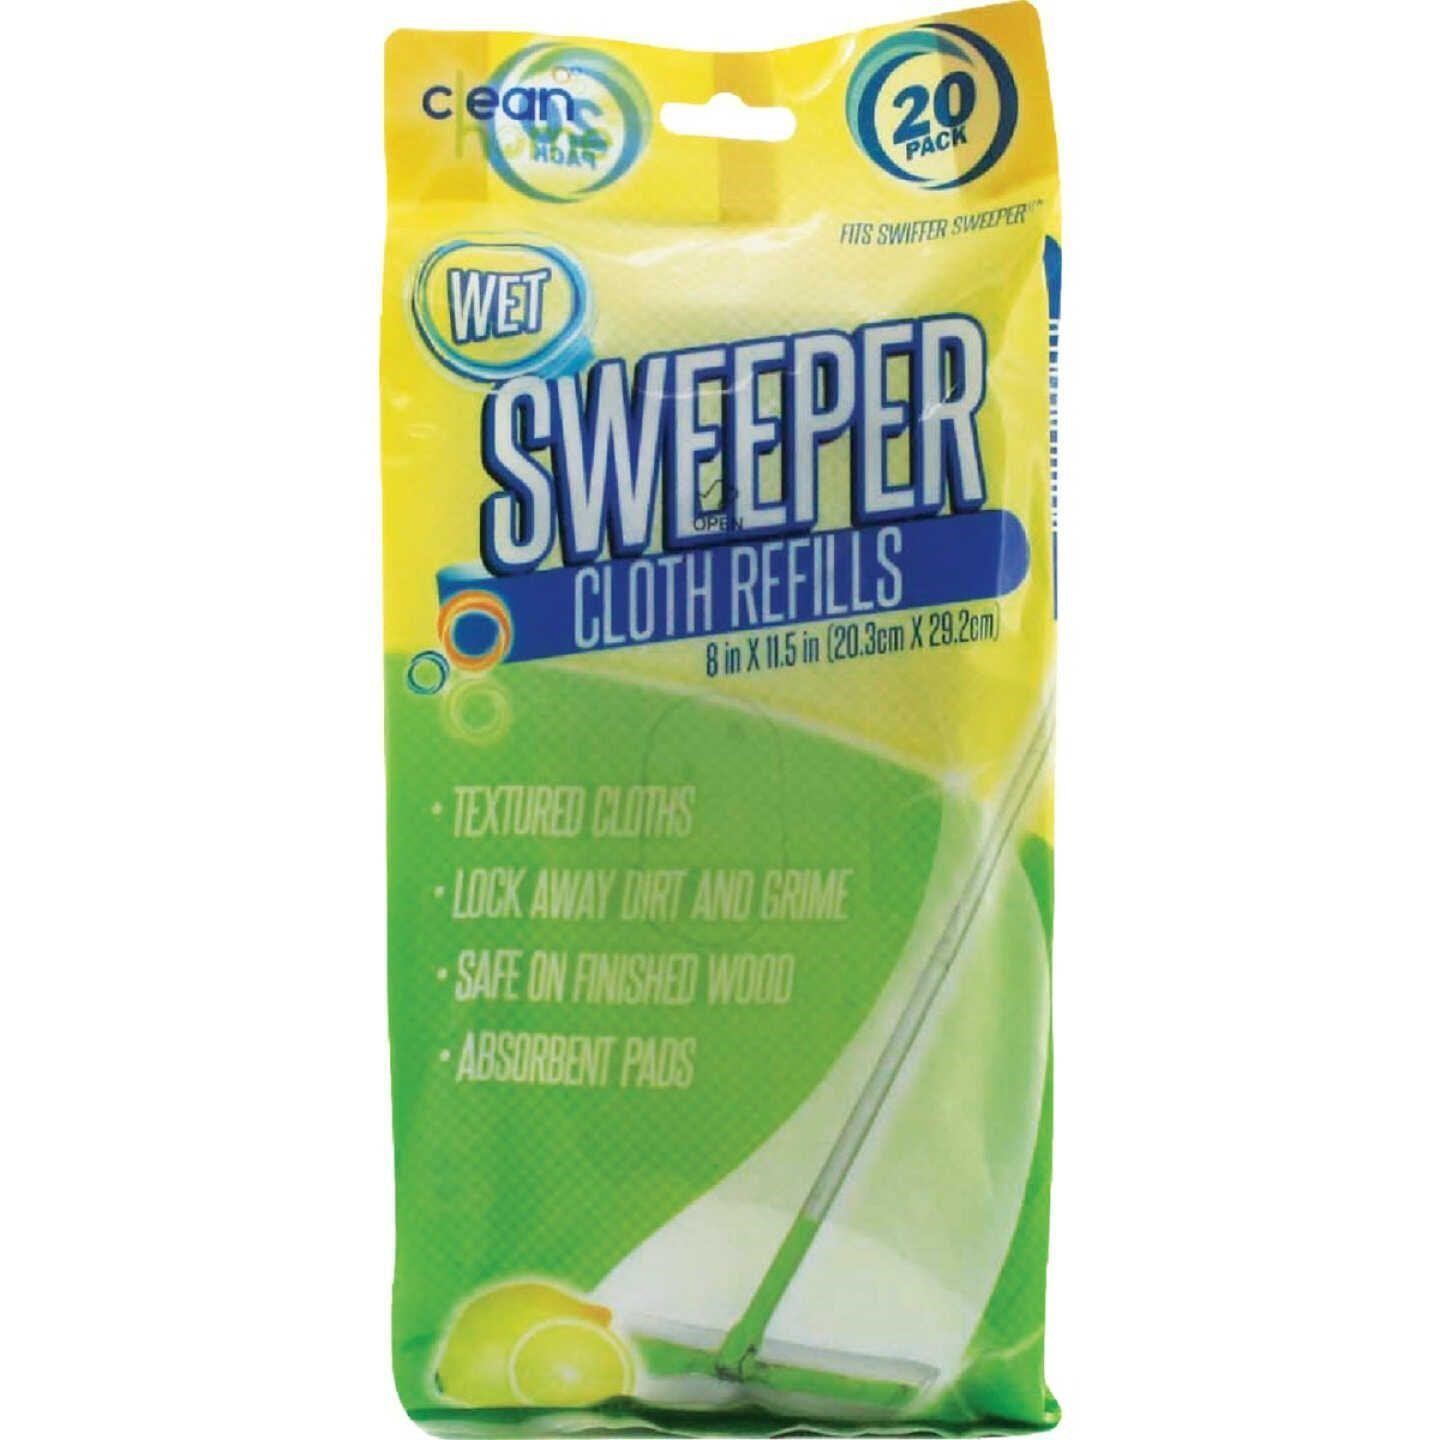 Wet Sweeper Cloth Refills -Fits Swiffer Case of 24